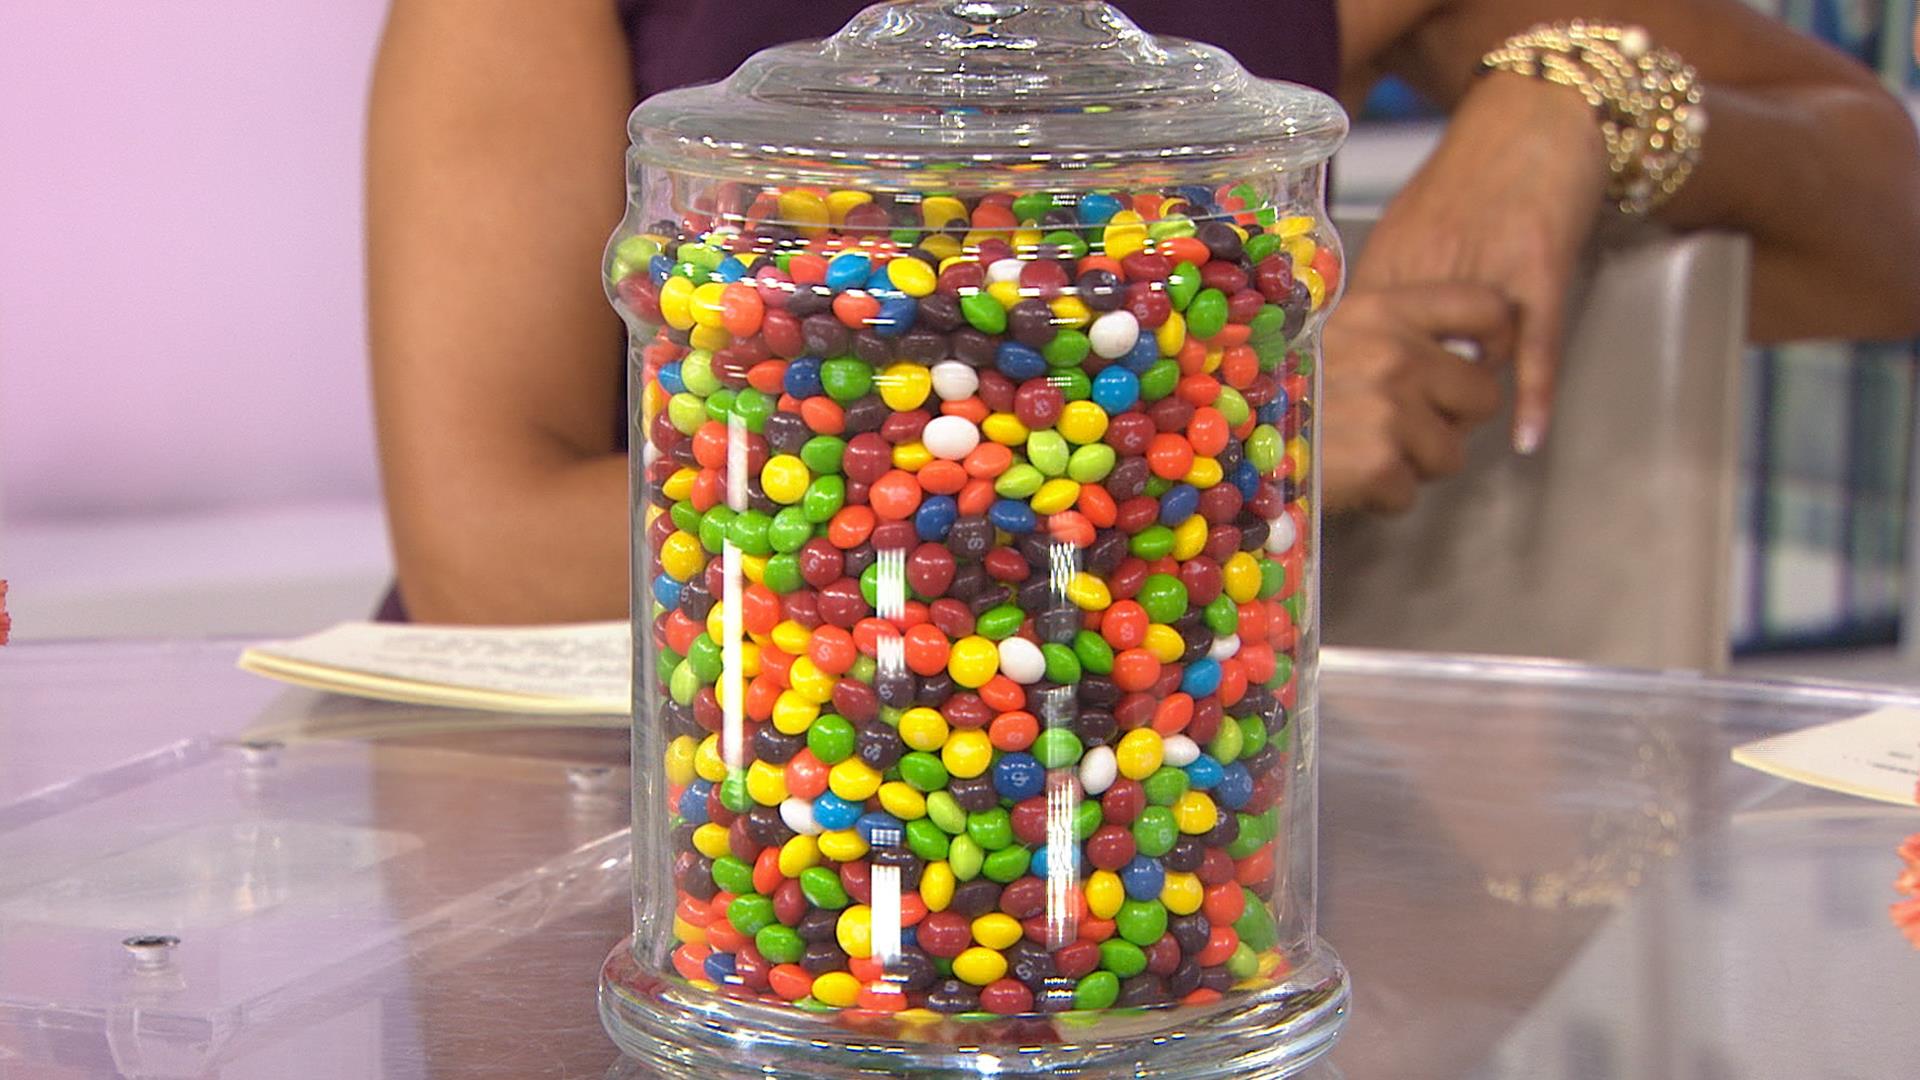 Can you guess how many Skittles are in this jar?